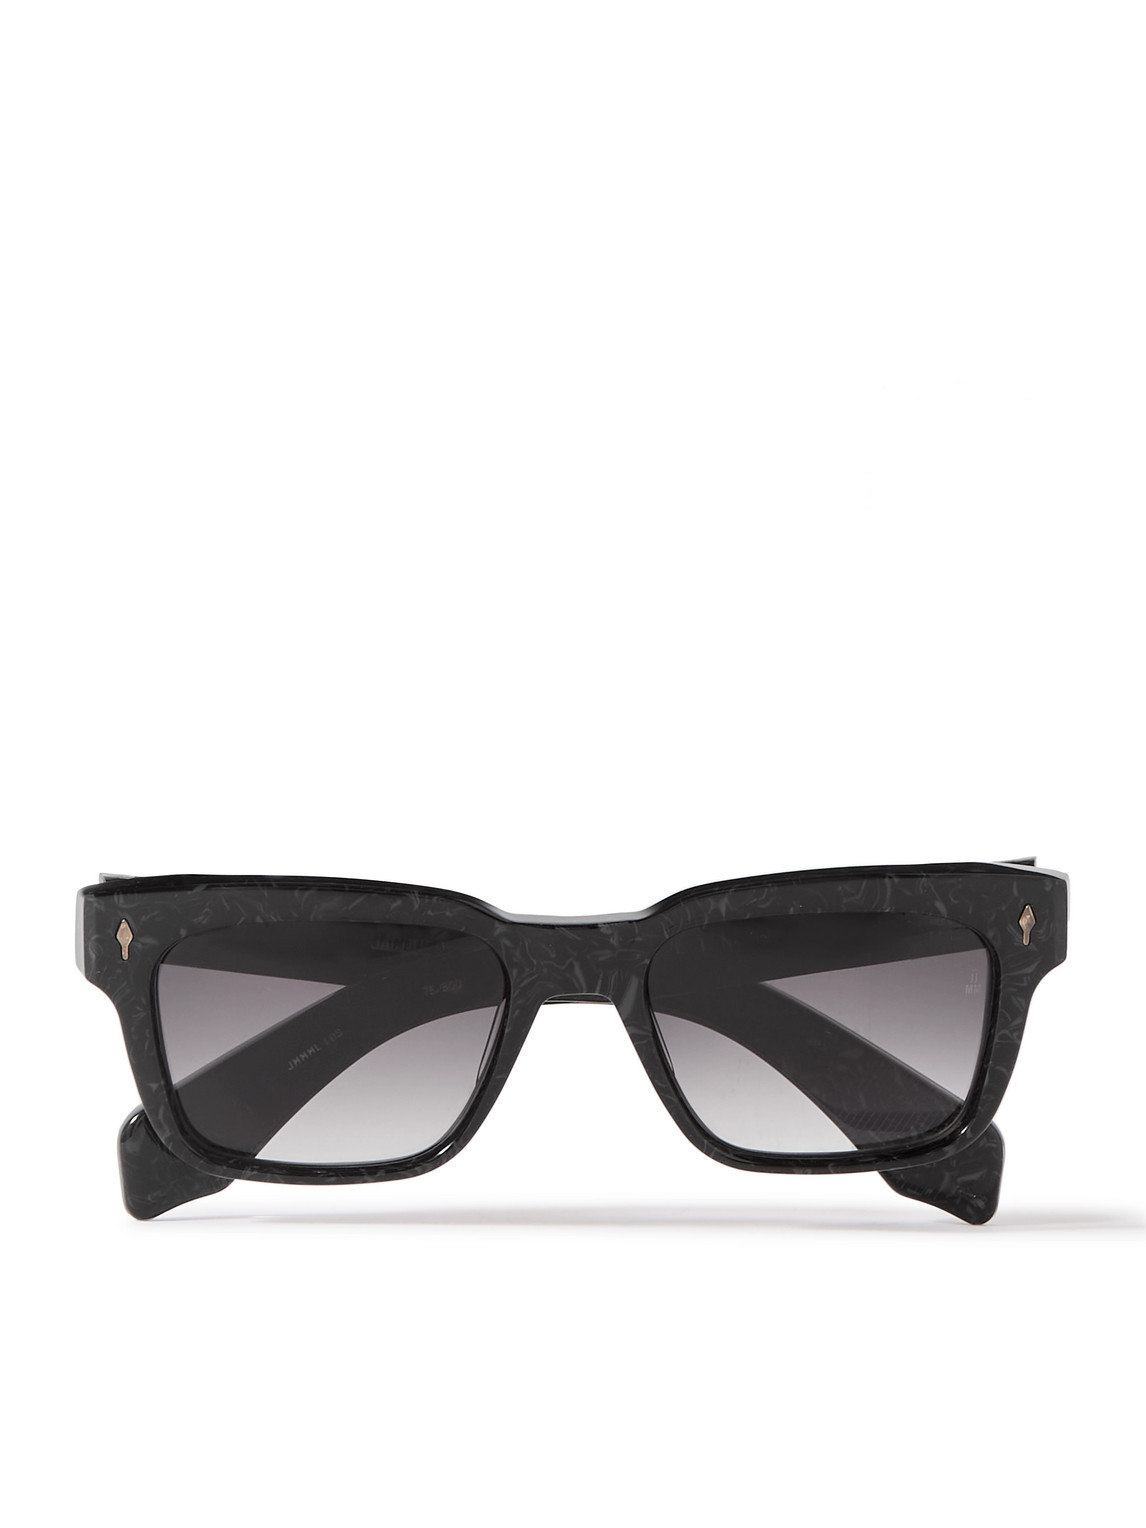 Jacques Marie Mage Molino 10s Square-frame Acetate Sunglasses In Black